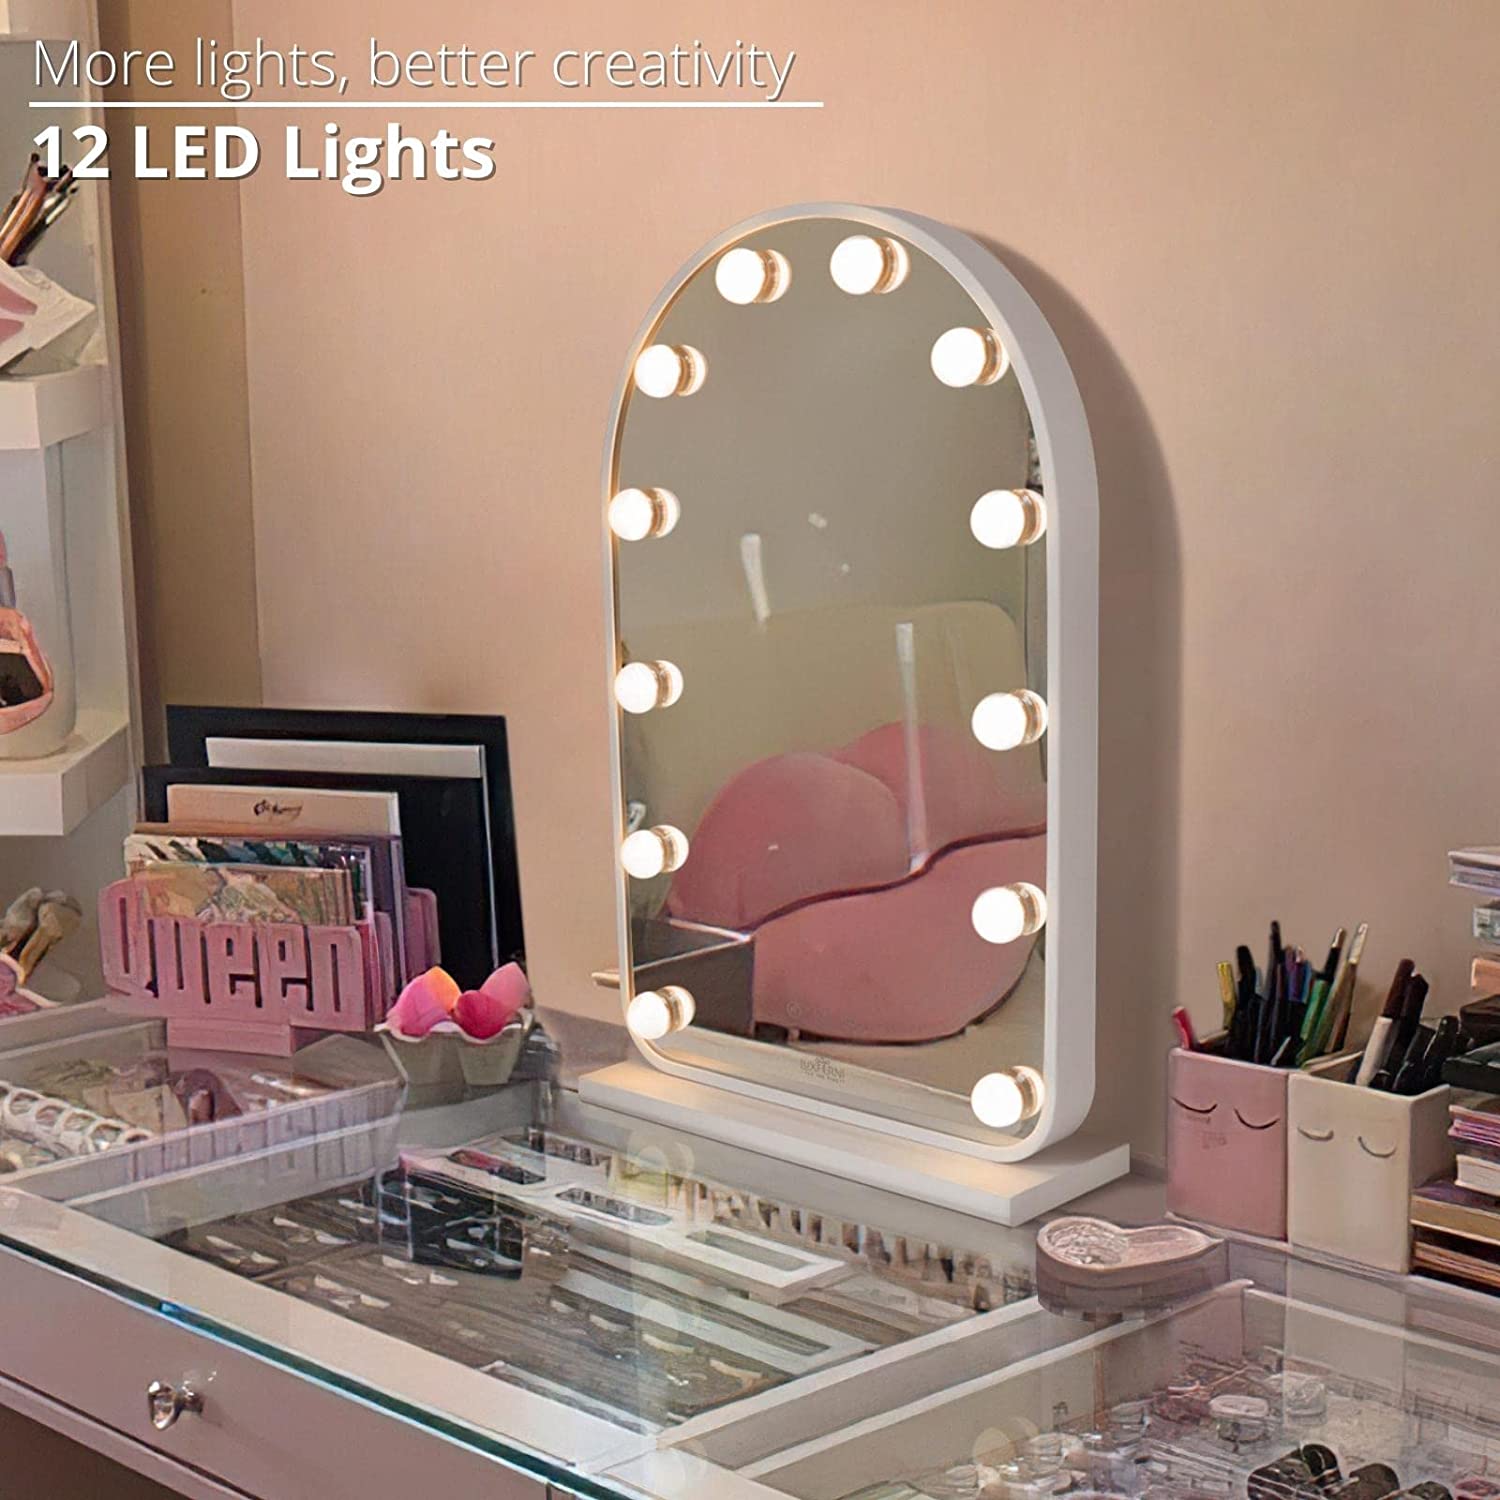 Starry 10 Hollywood Vanity Mirror, Professional LED